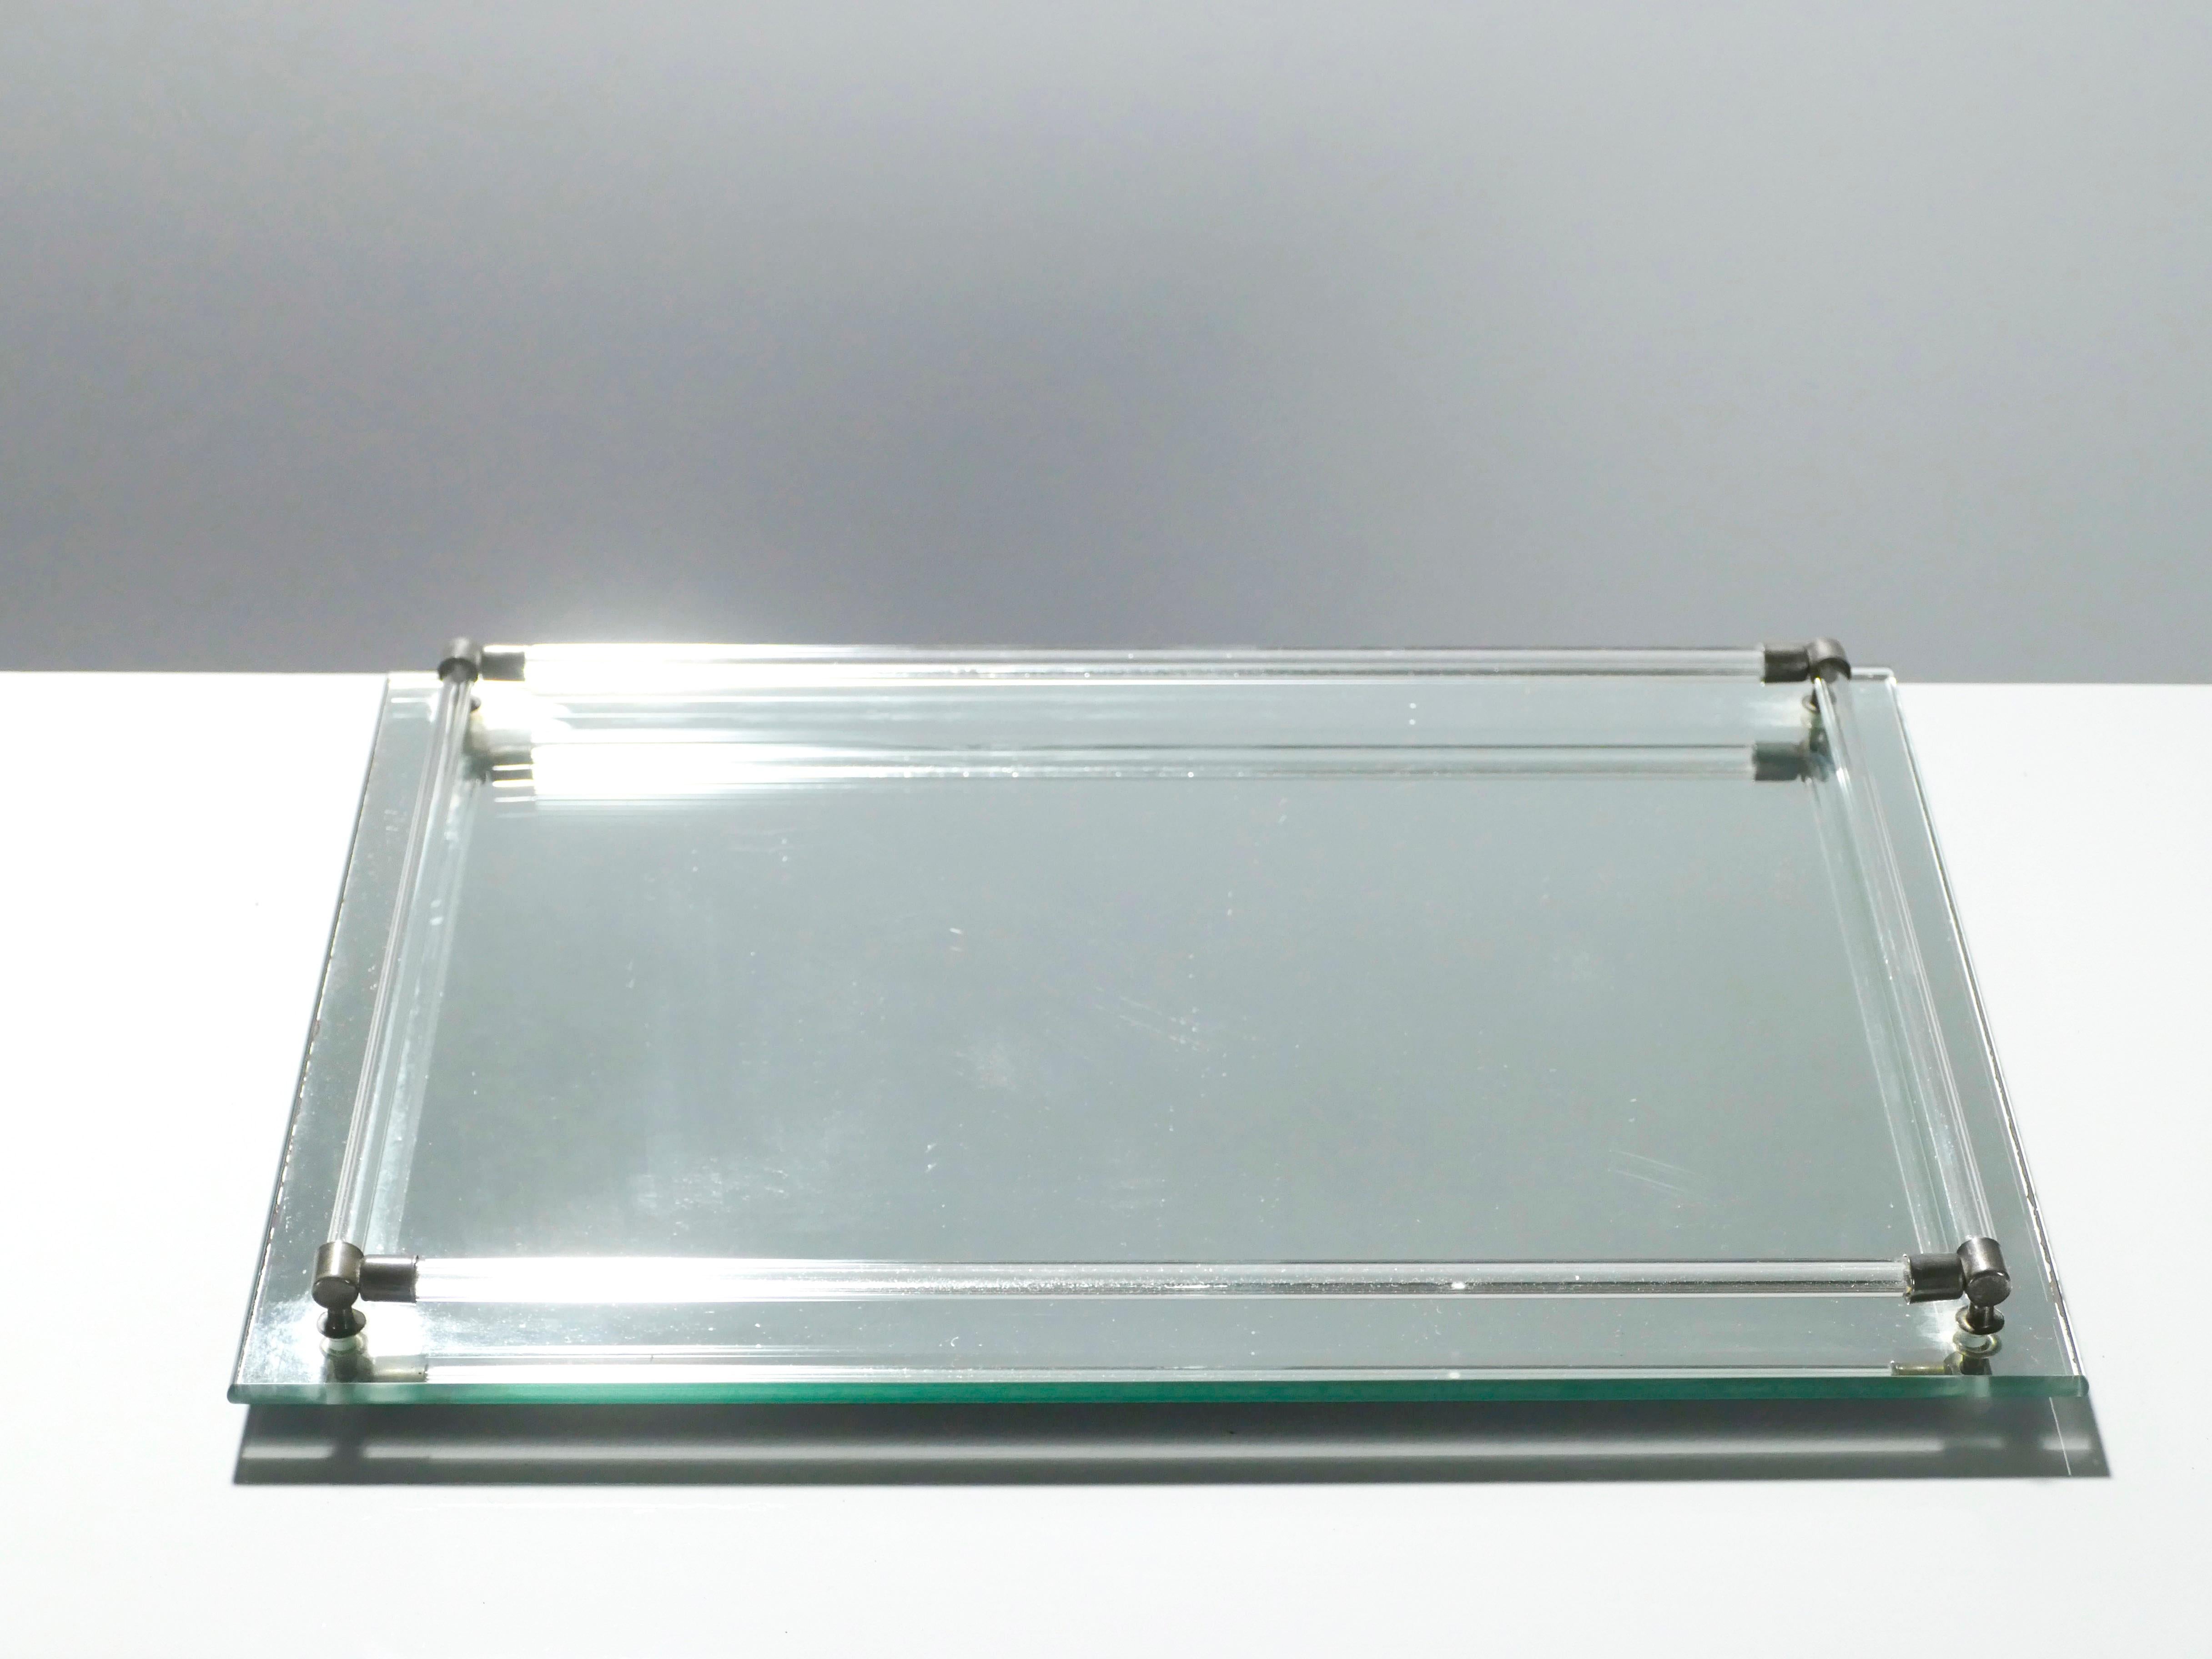 French Midcentury Mirrored Tray Style of Jacques Adnet, 1940s (Moderne der Mitte des Jahrhunderts)